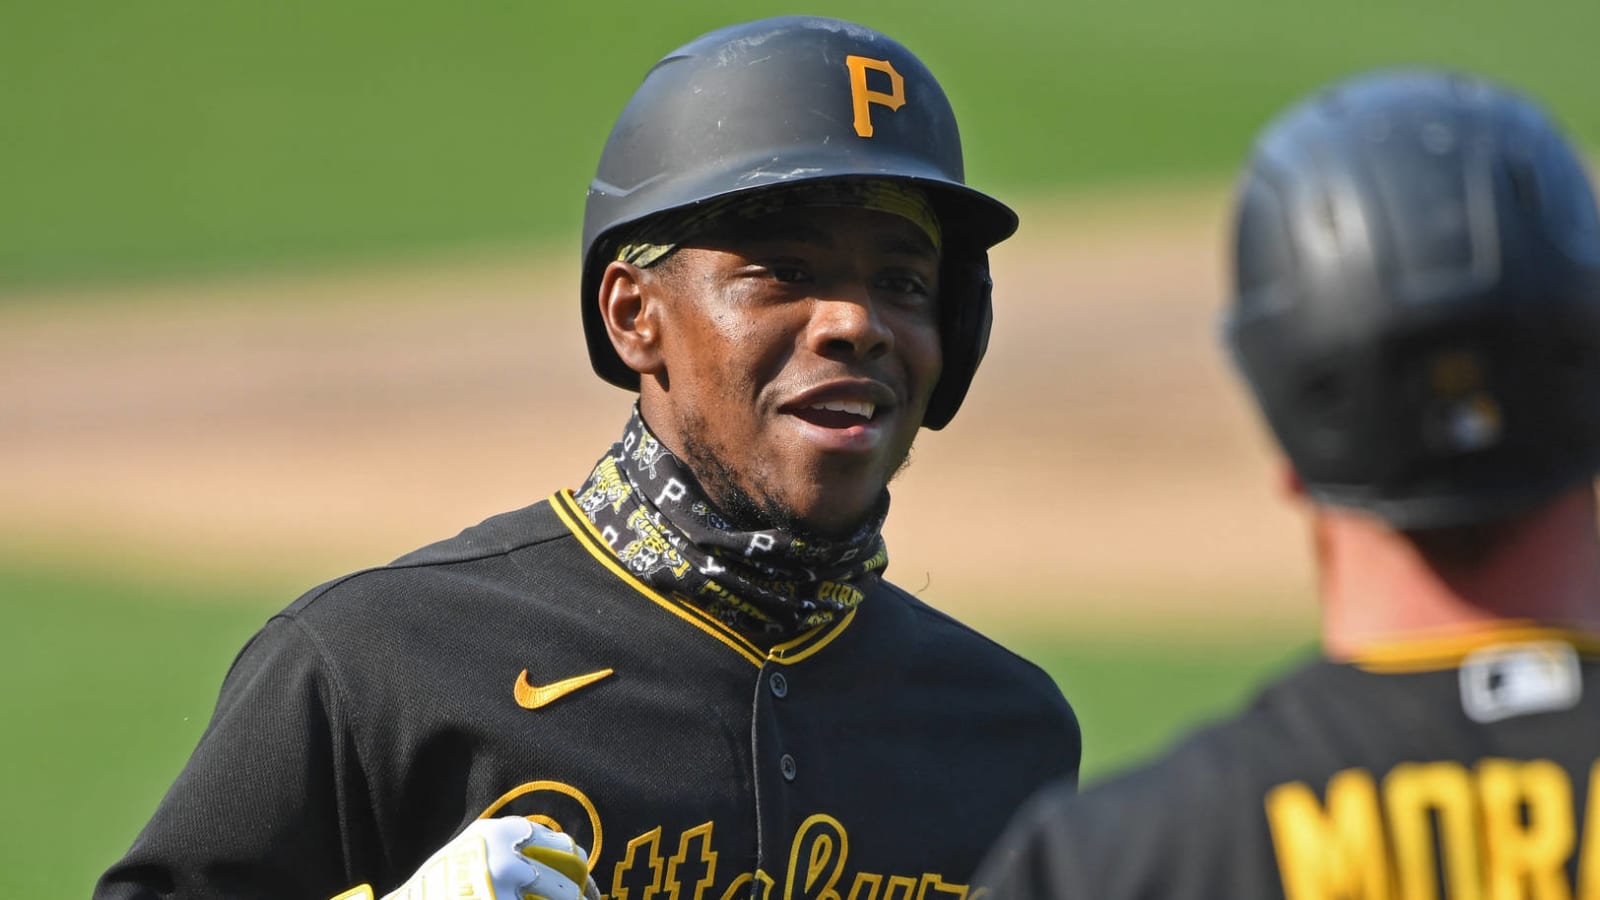 Ke'Bryan Hayes Gets a Record Extension from the Pirates